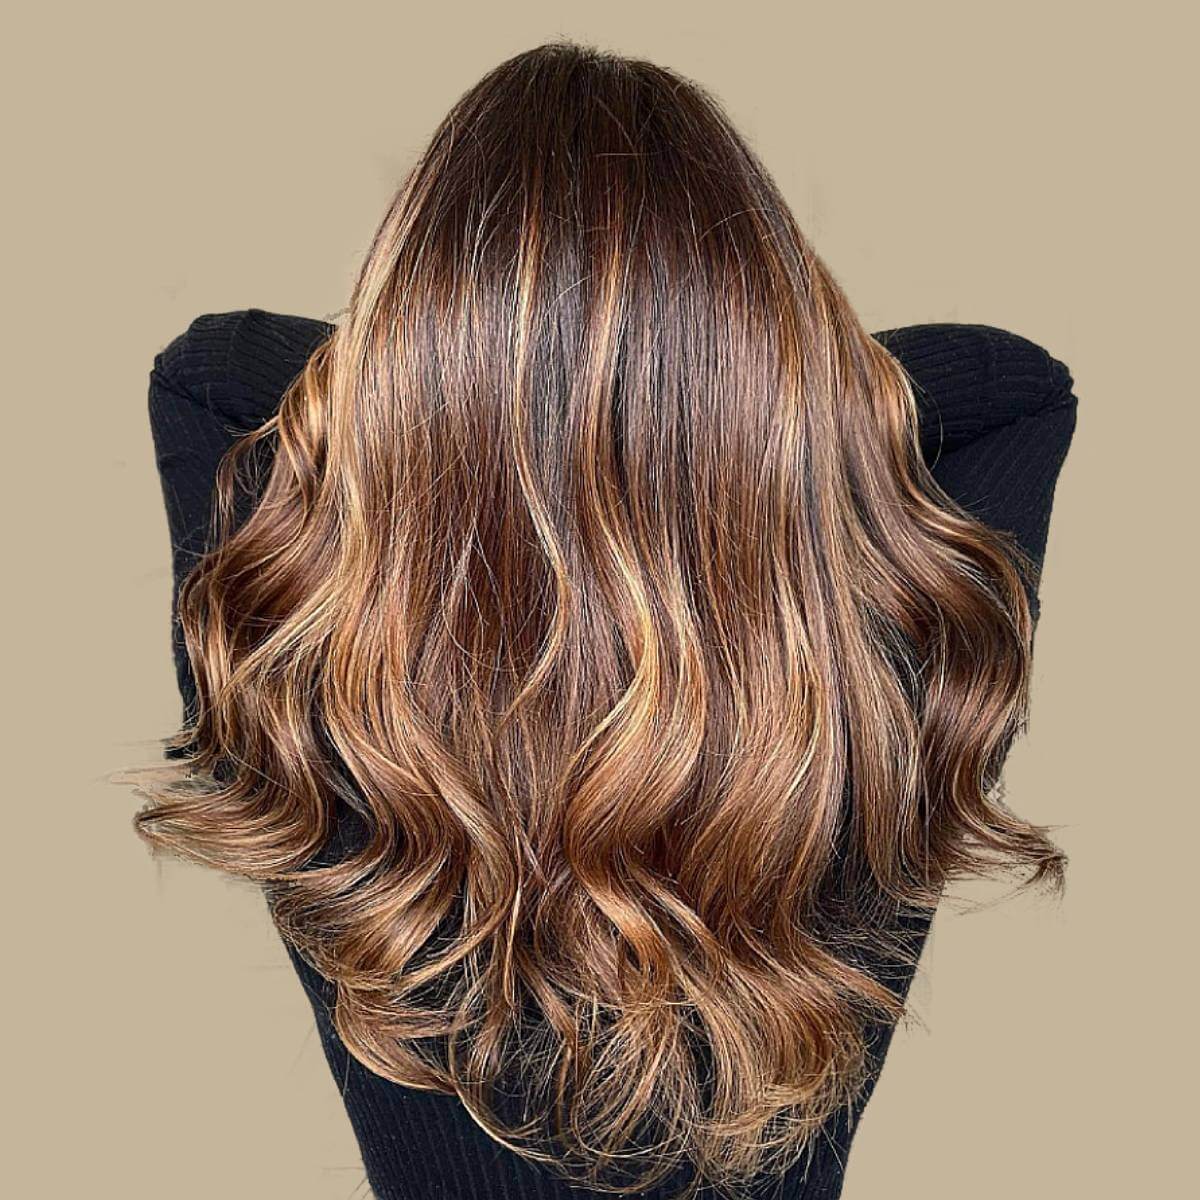 Fancy a new hair color this summer? Try the foilyage technique for  sun-kissed locks